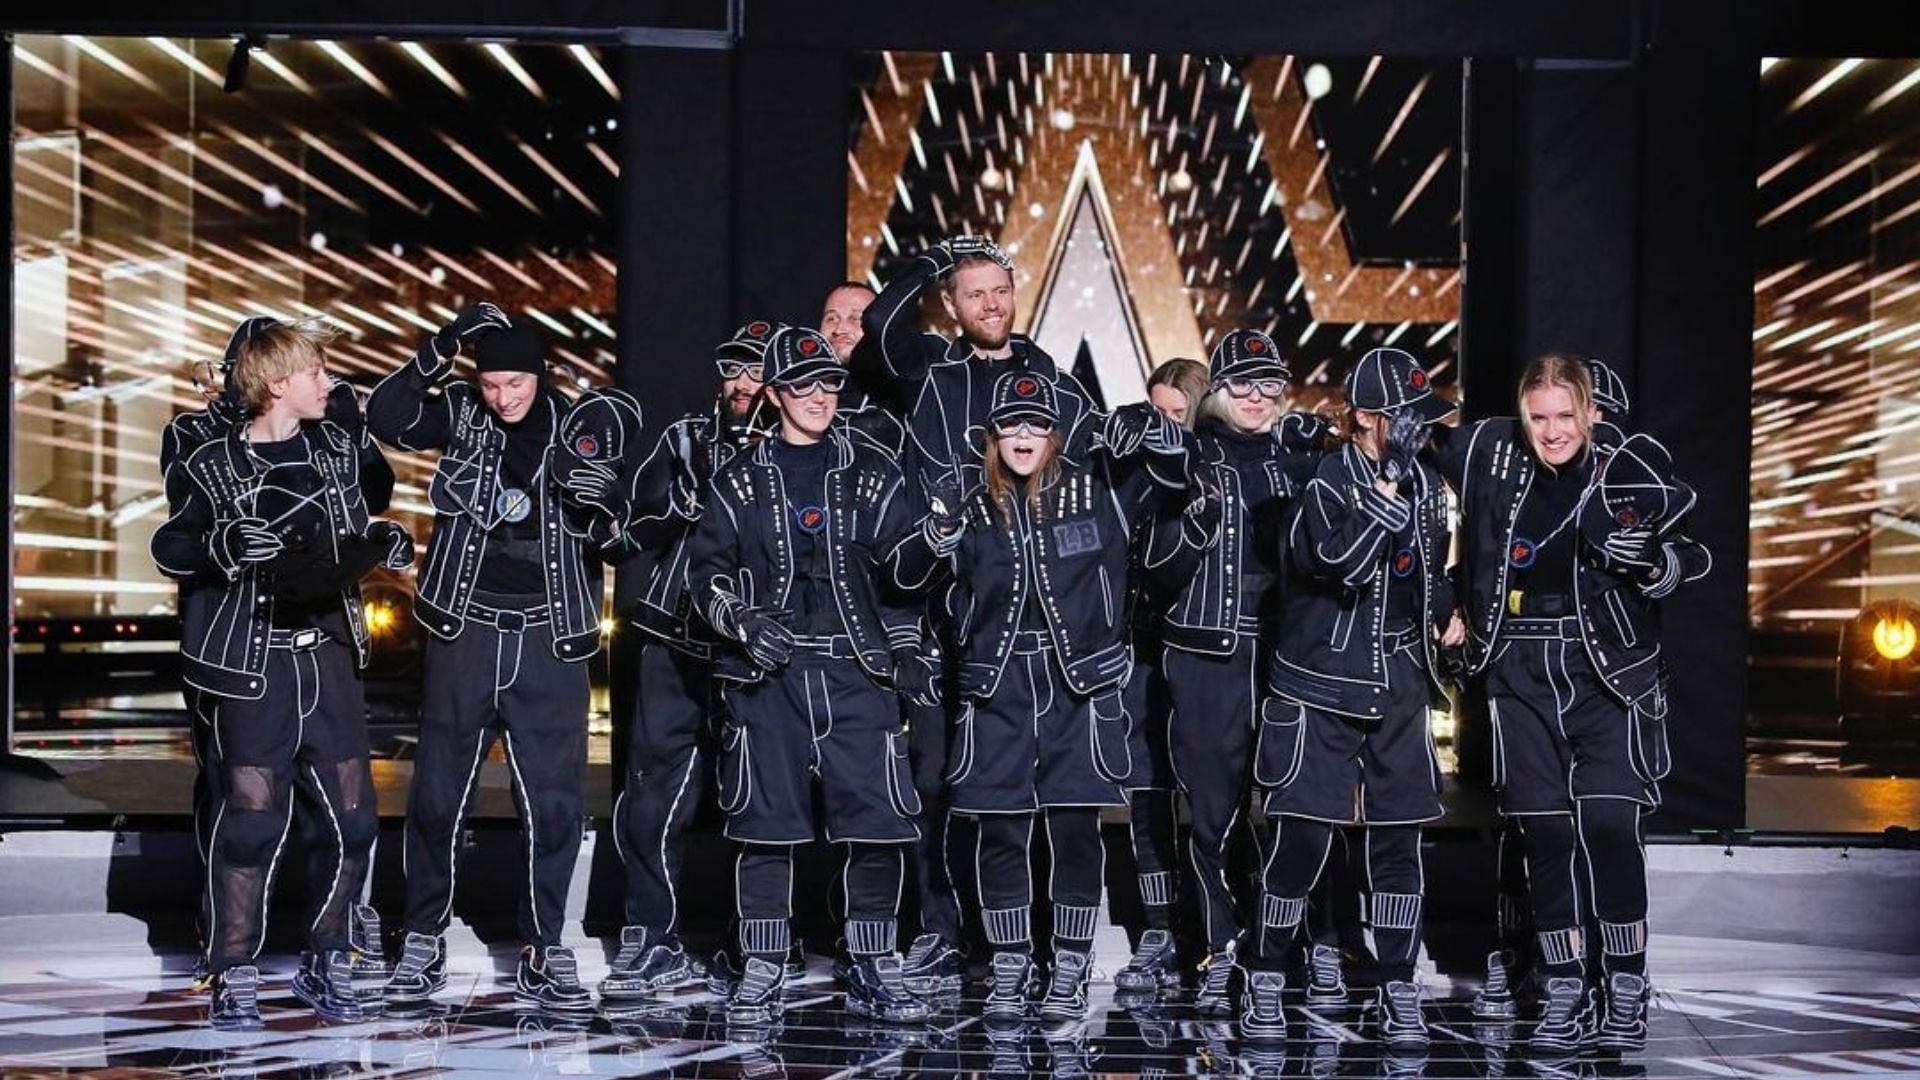 "They deserve to win" Fans loved watching Light Balance Kids' final